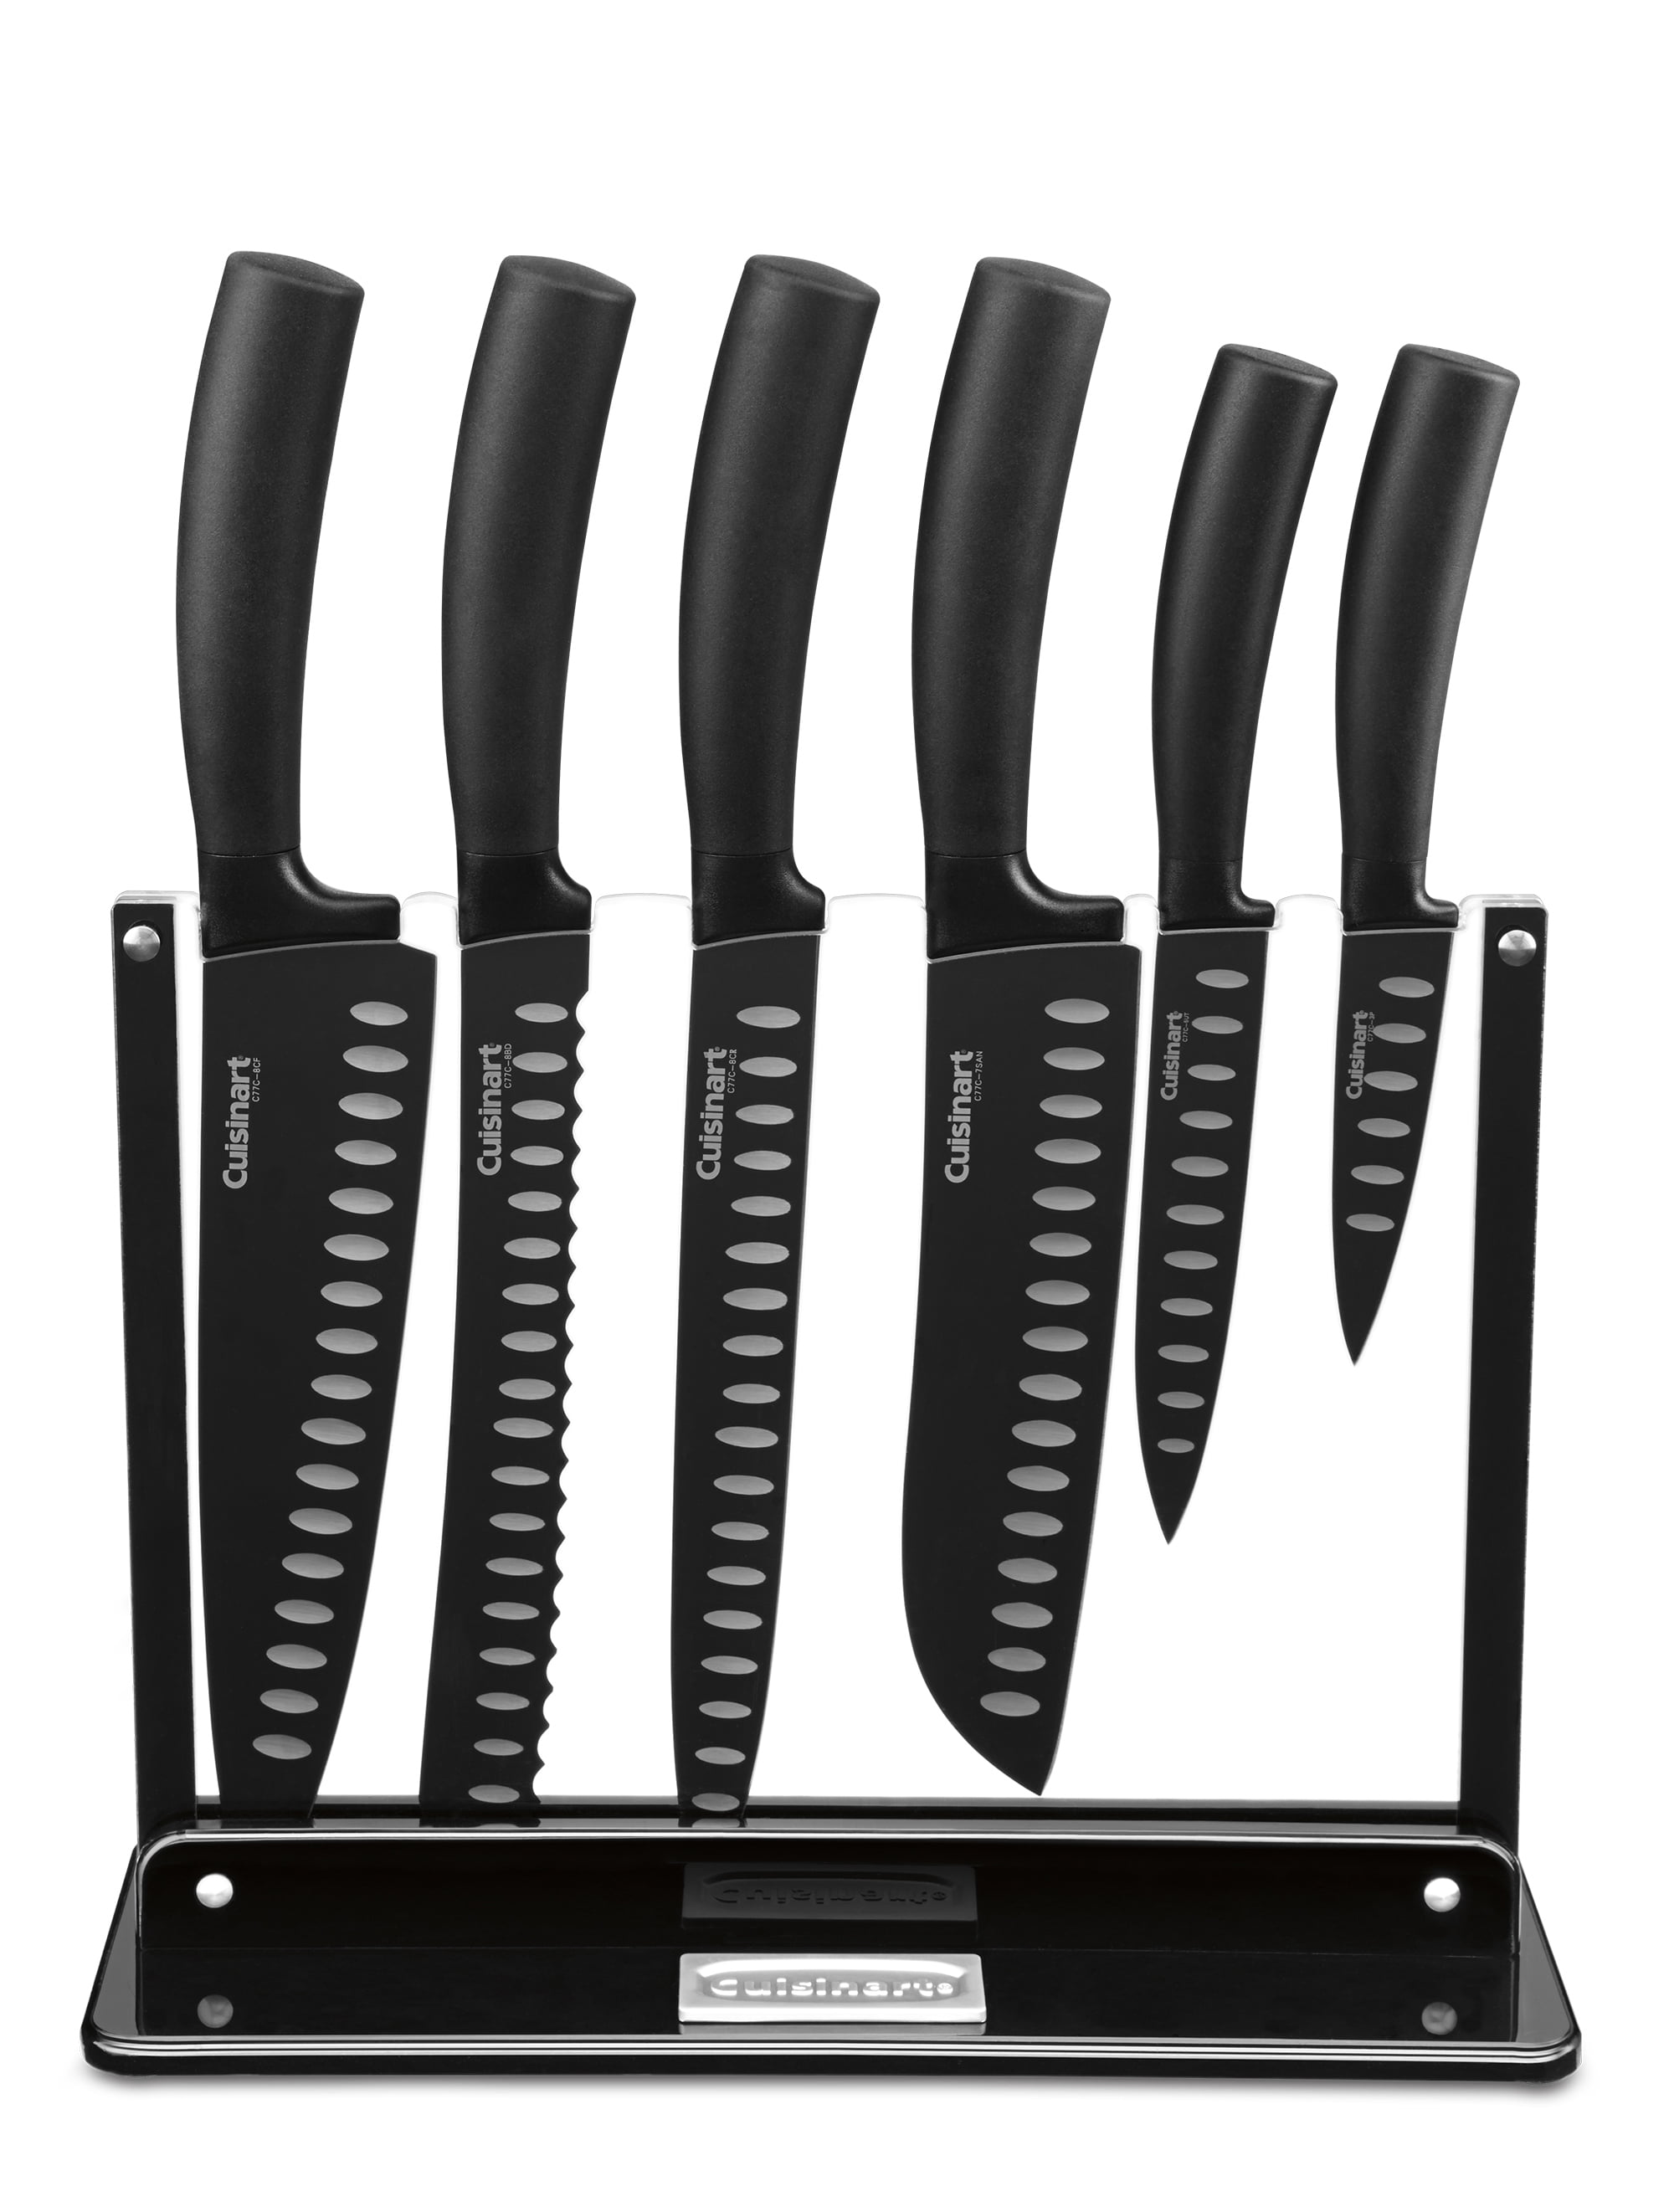 Cuisinart Kitchen Knife Black 6 set , with Matching Blade Protective  Sheath, Scratch Resistant & Rust Proof, High Carbon Stainless Steel, TPR  Coating